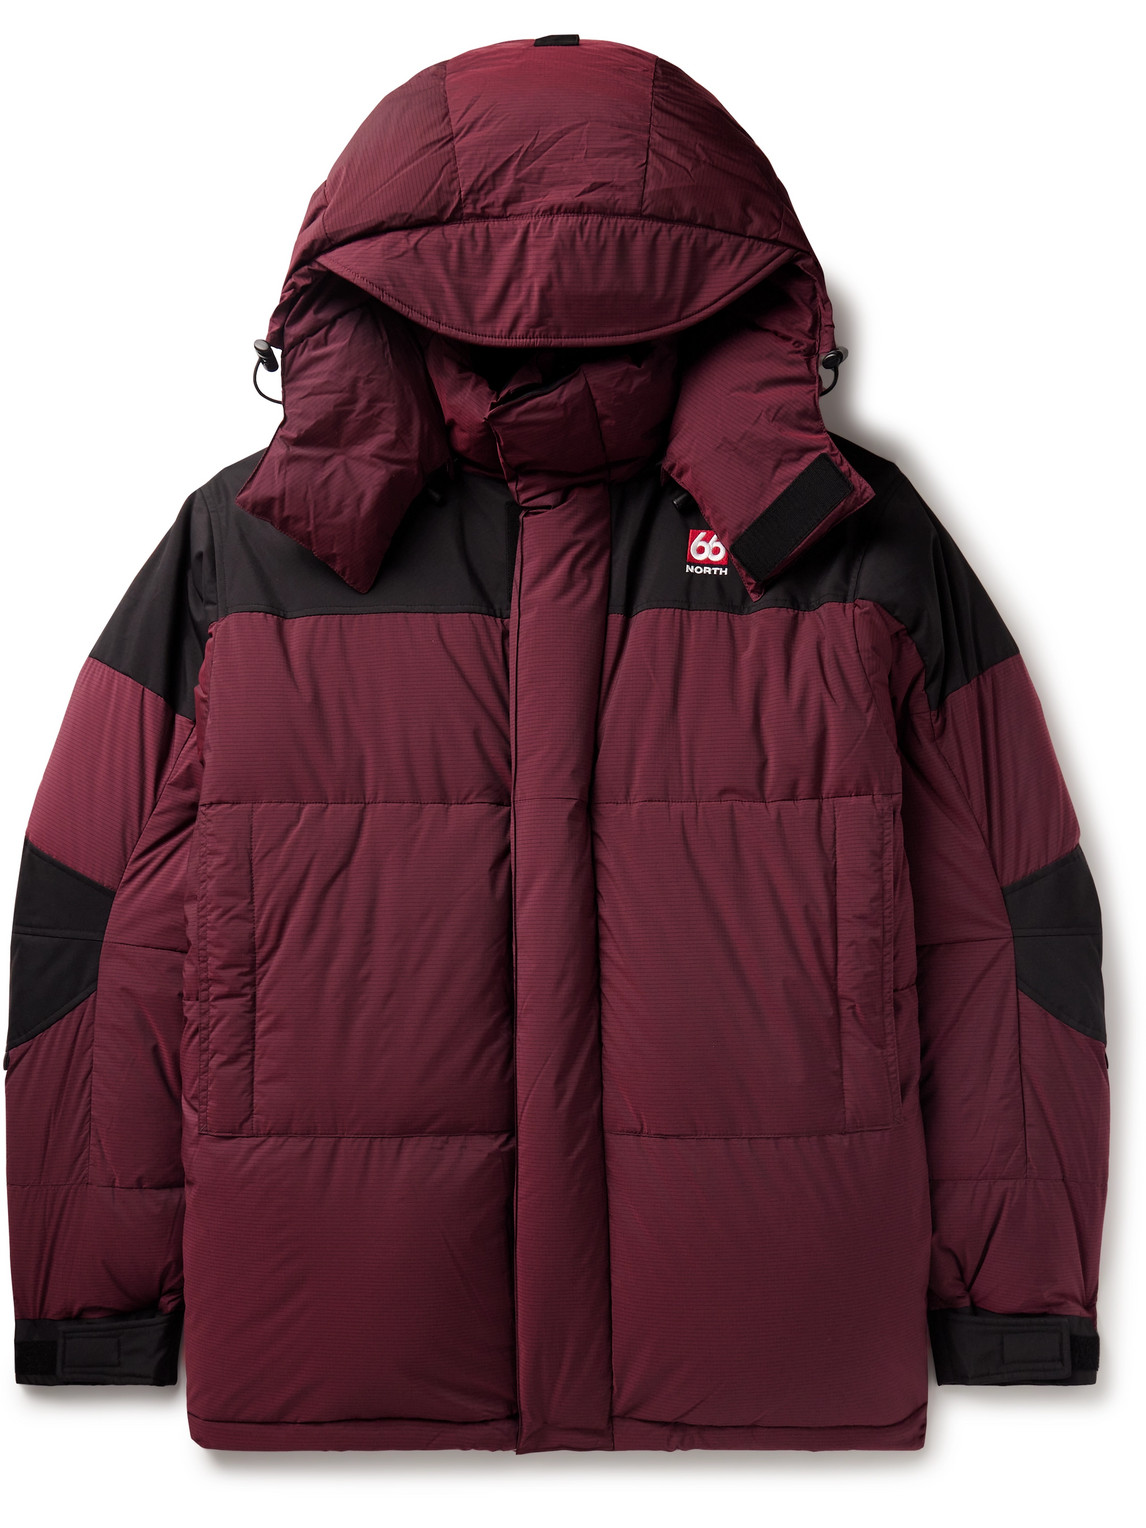 66 North Tindur Quilted Gore-tex® Down Jacket In Burgundy